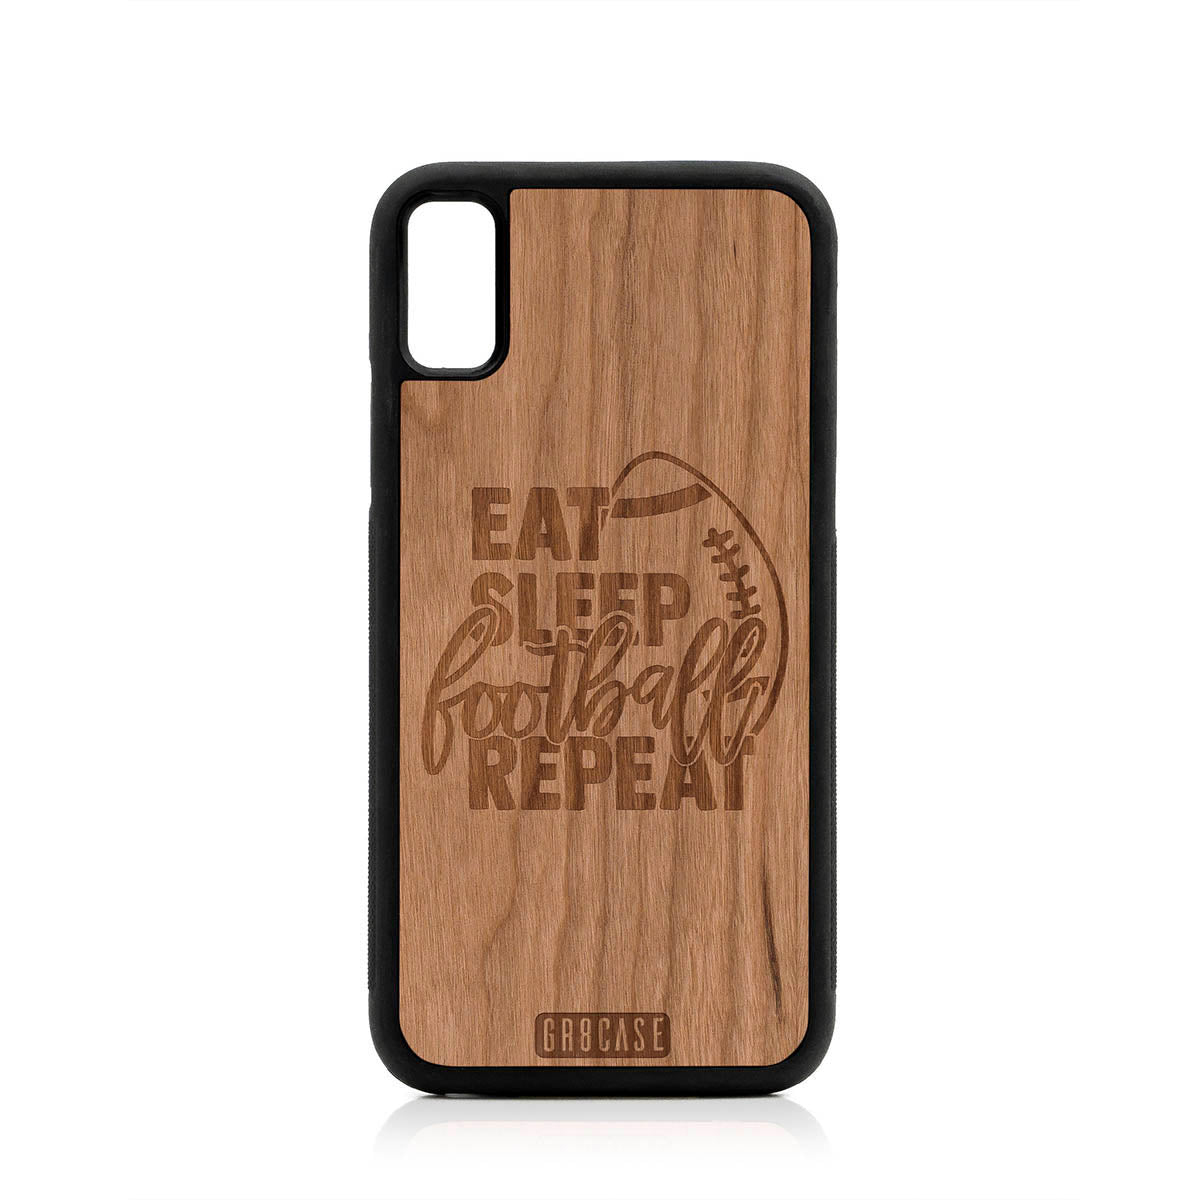 Eat Sleep Football Repeat Design Wood Case For iPhone X/XS